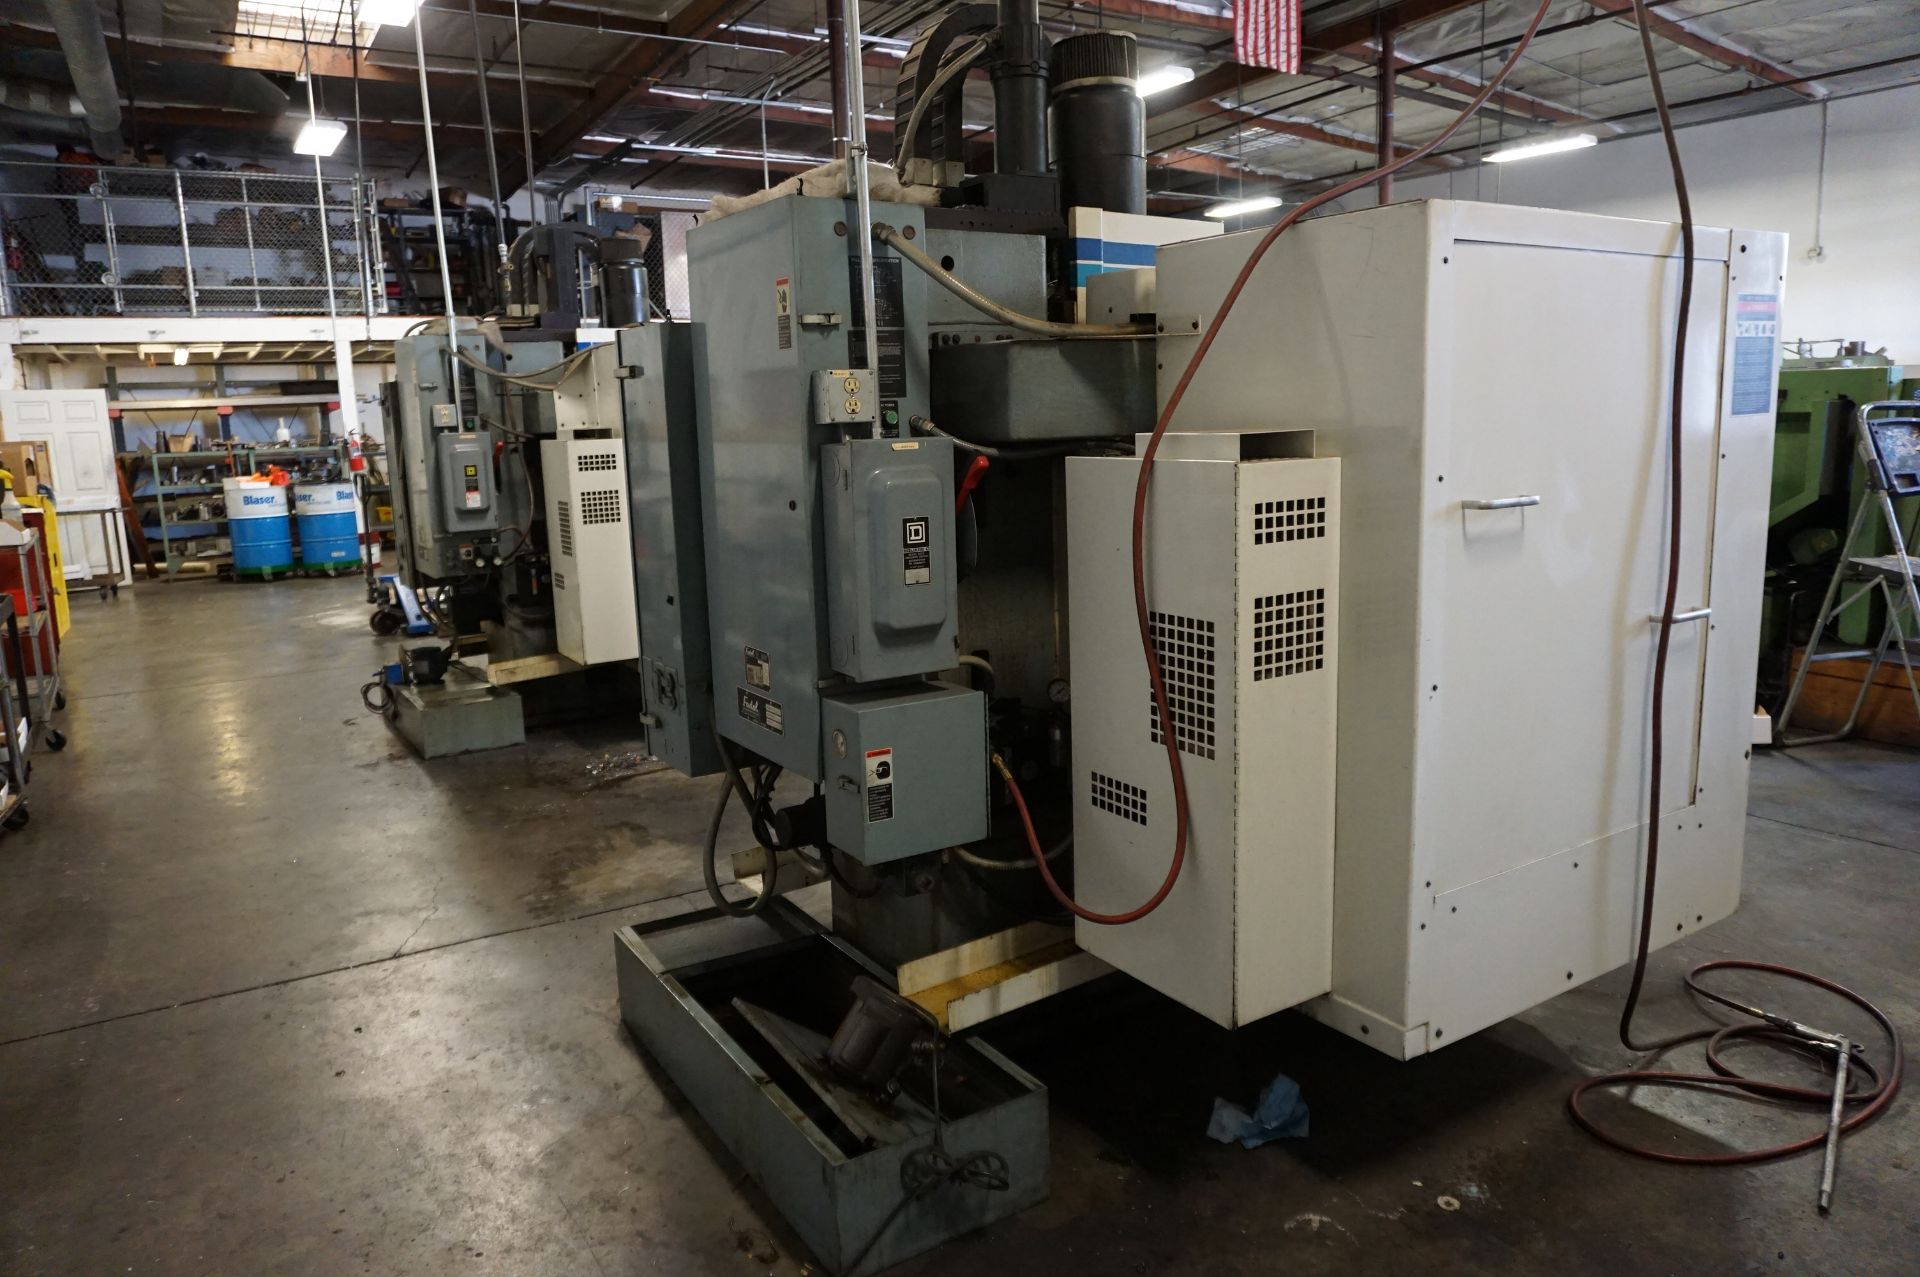 1995 FADAL VERTICAL MACHINING CENTER 3016 HT, S/N 9501703, 3 AXIS, WITH MANUALS - Image 10 of 12